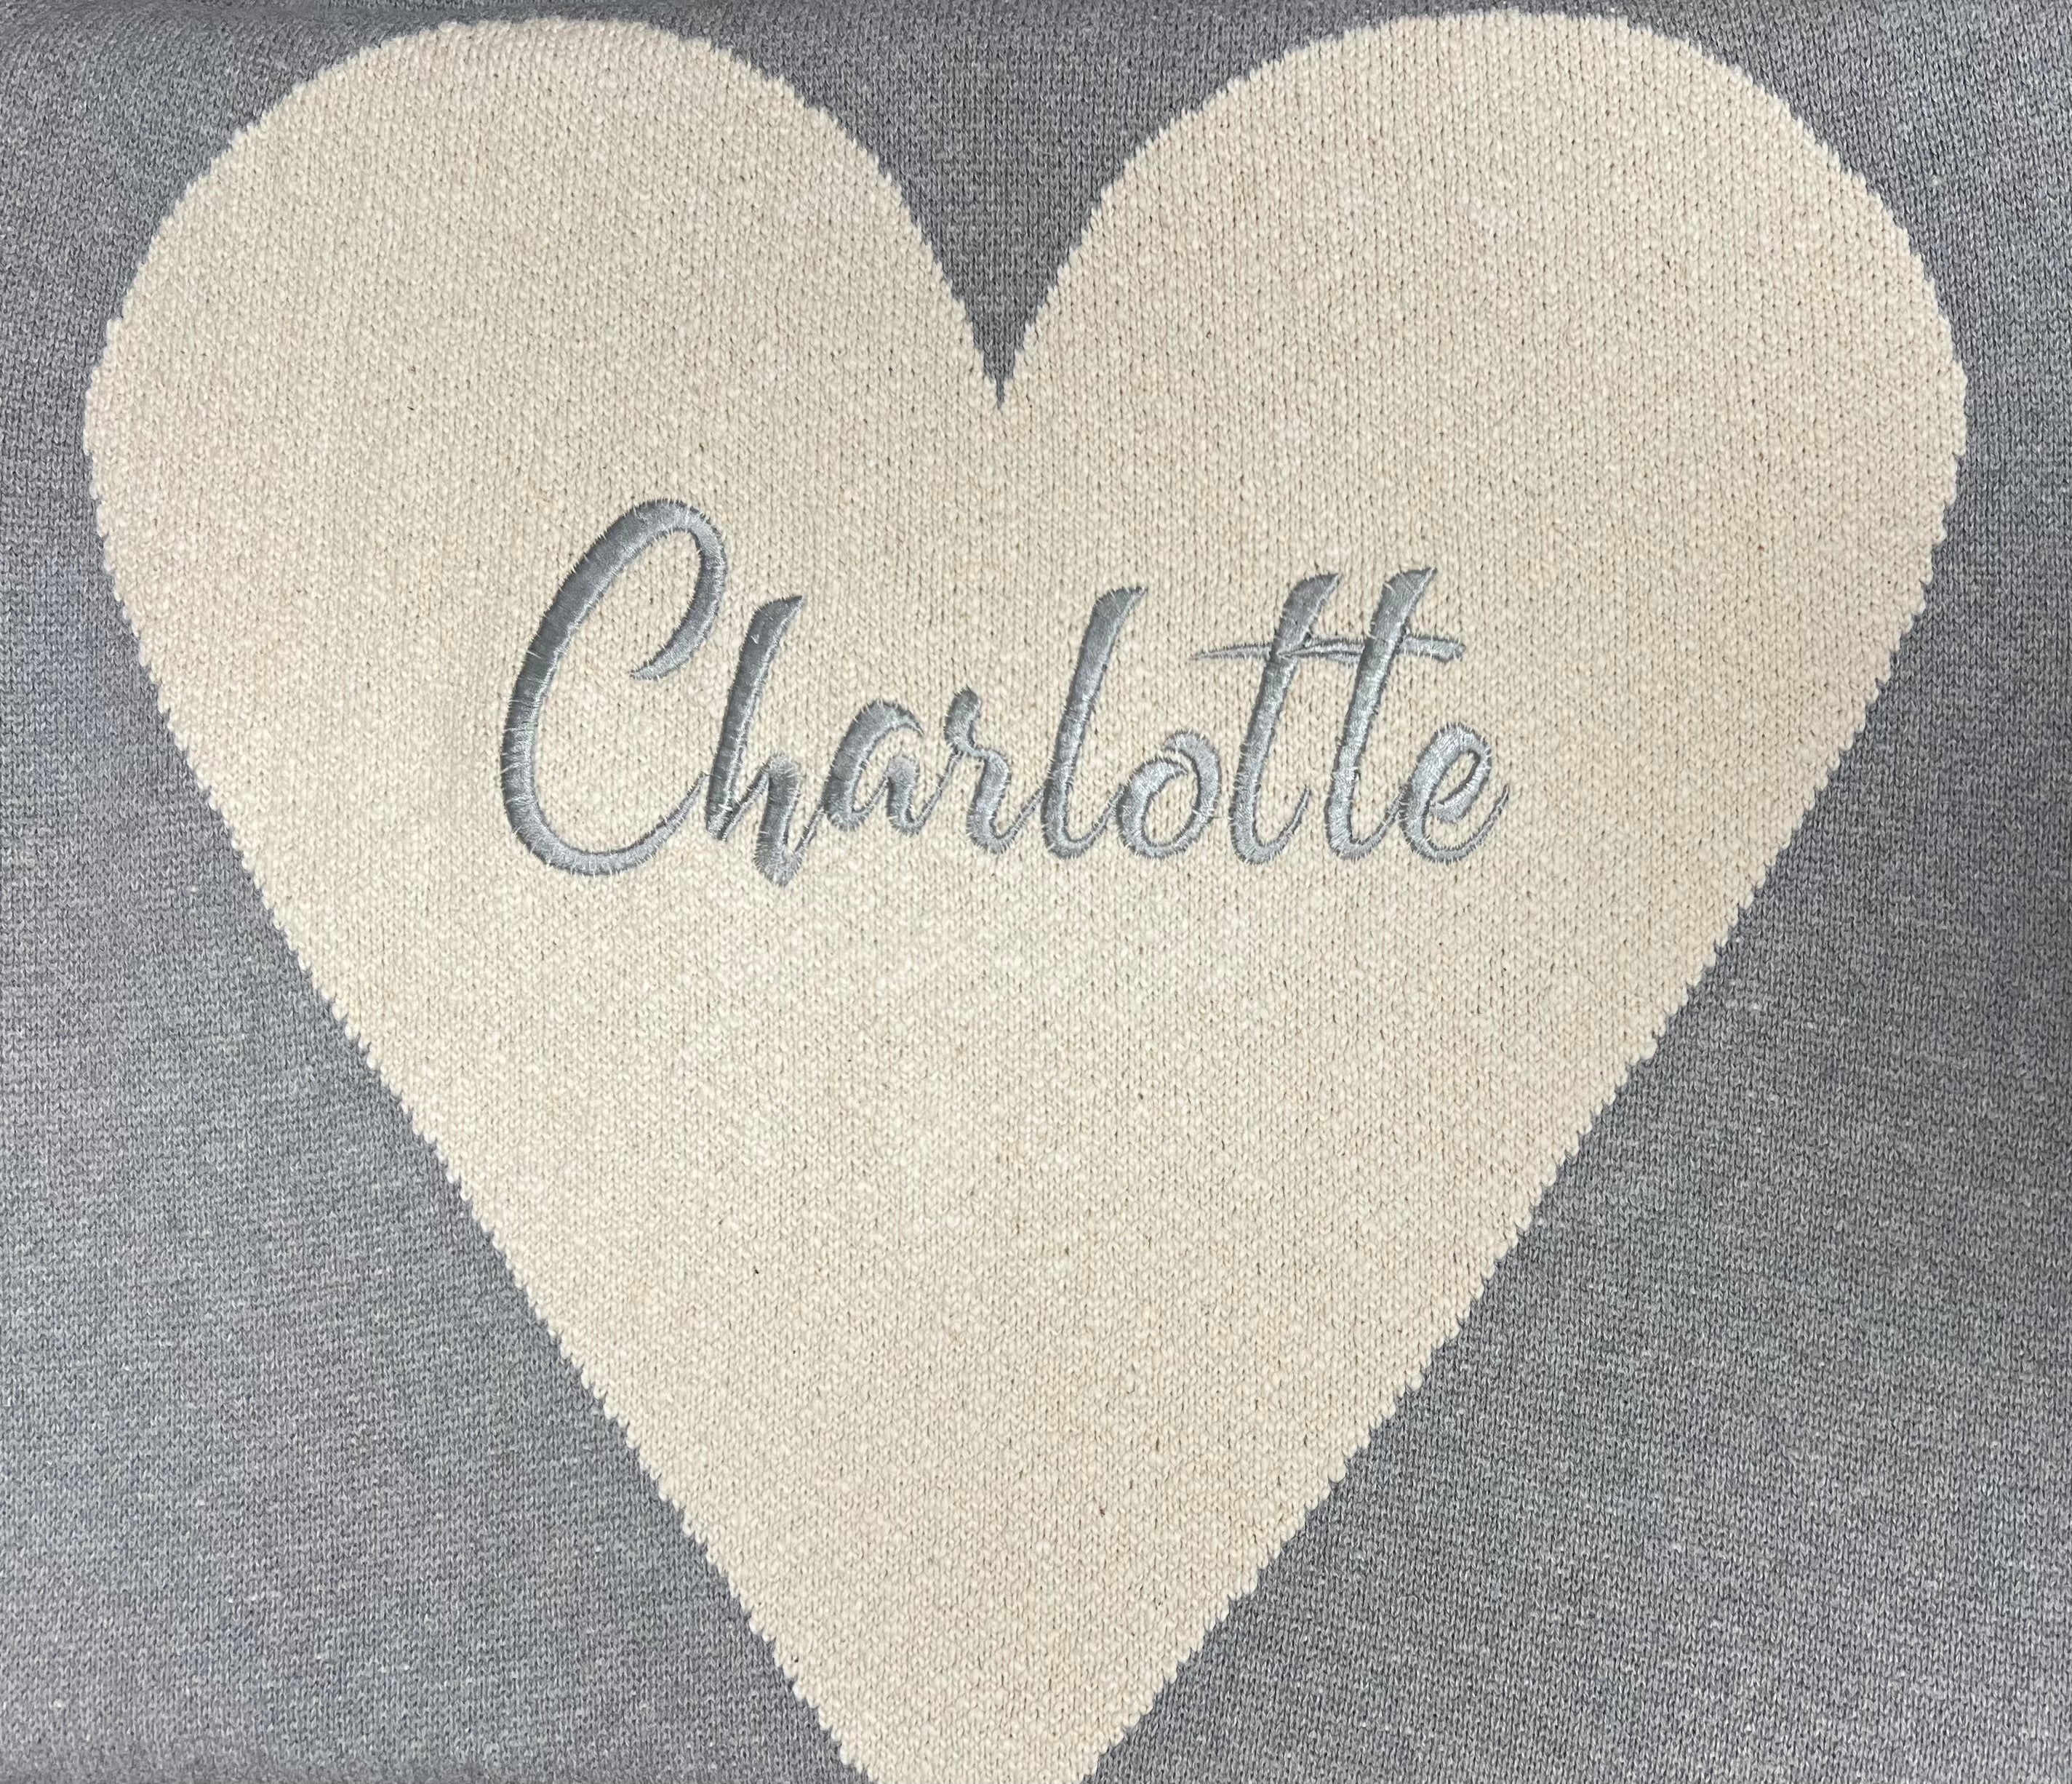 Personalized Blanket - Grey With Cream Heart